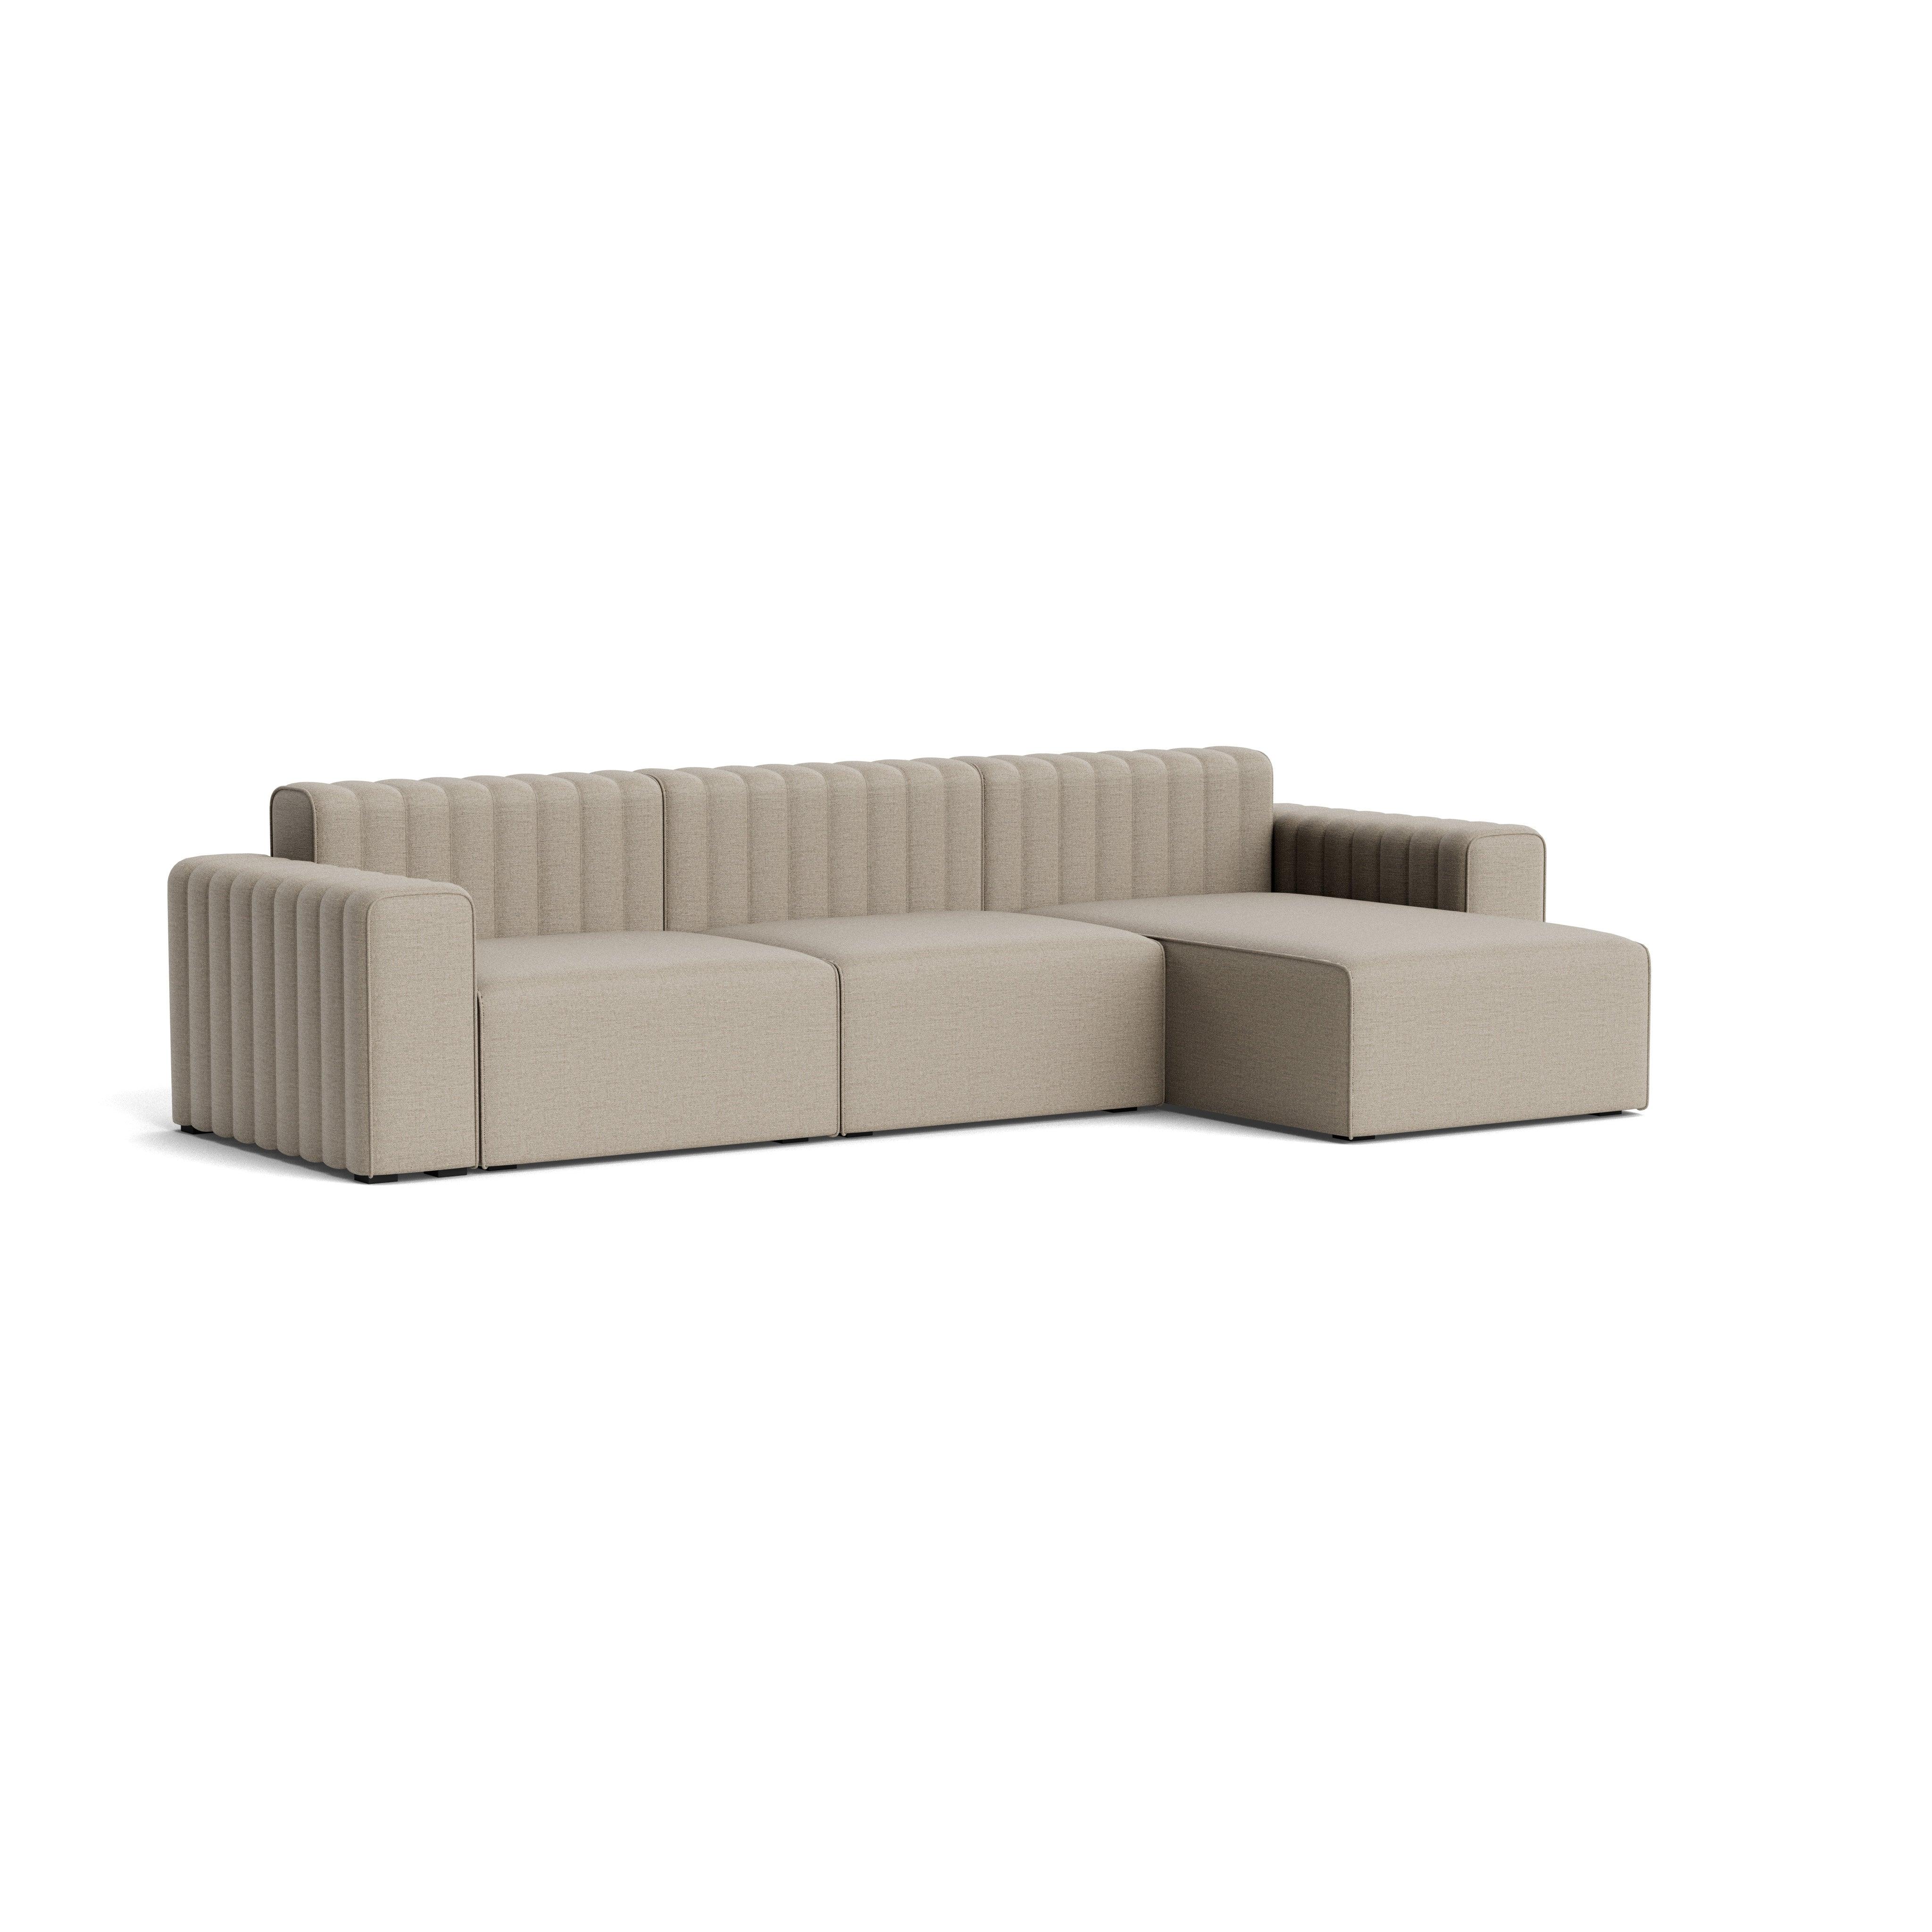 RIFF Sofa, Three Seater with Chaise Lounge Left (Chaise Longue Left, Center, Right Arm) - Nina - Linen Col 2 - PARIS14A.RO